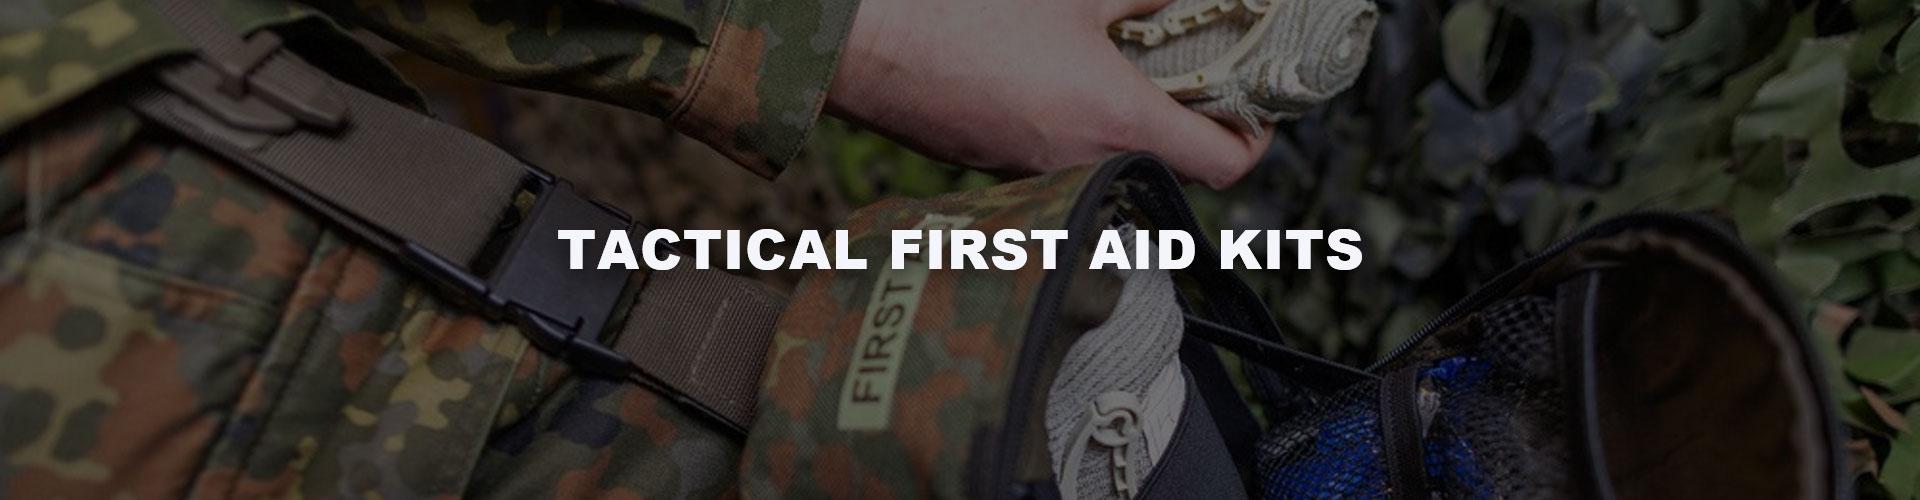 Tactical First Aid Kits for Survival